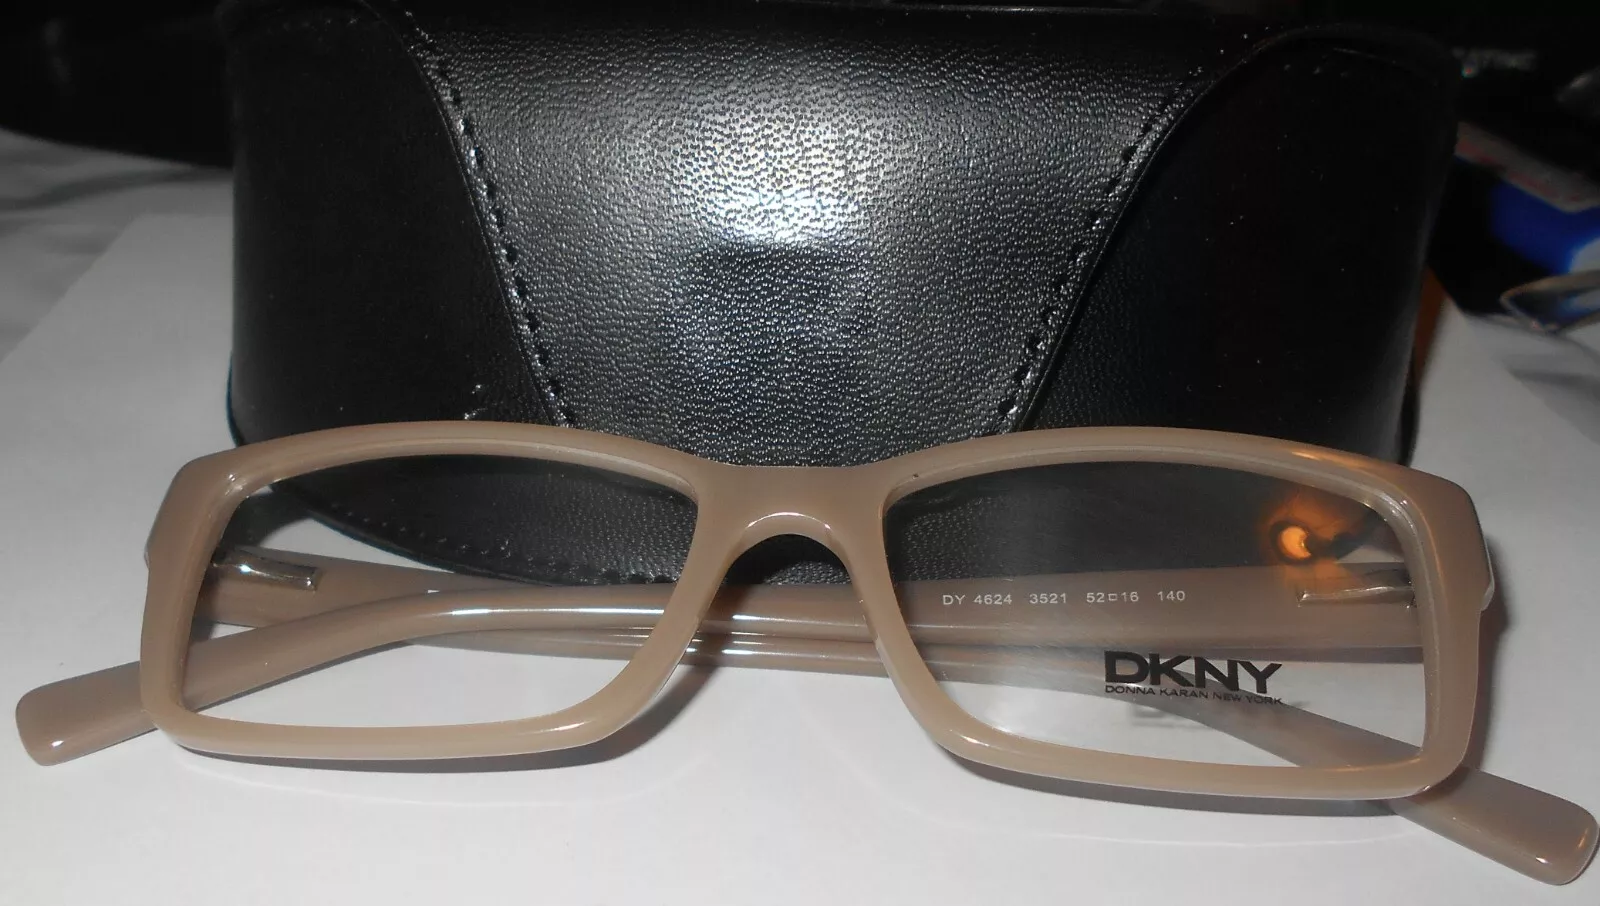 DNKY Glasses/Frames 4624 3521 52 16 140 -new with case - brand new - $25.00